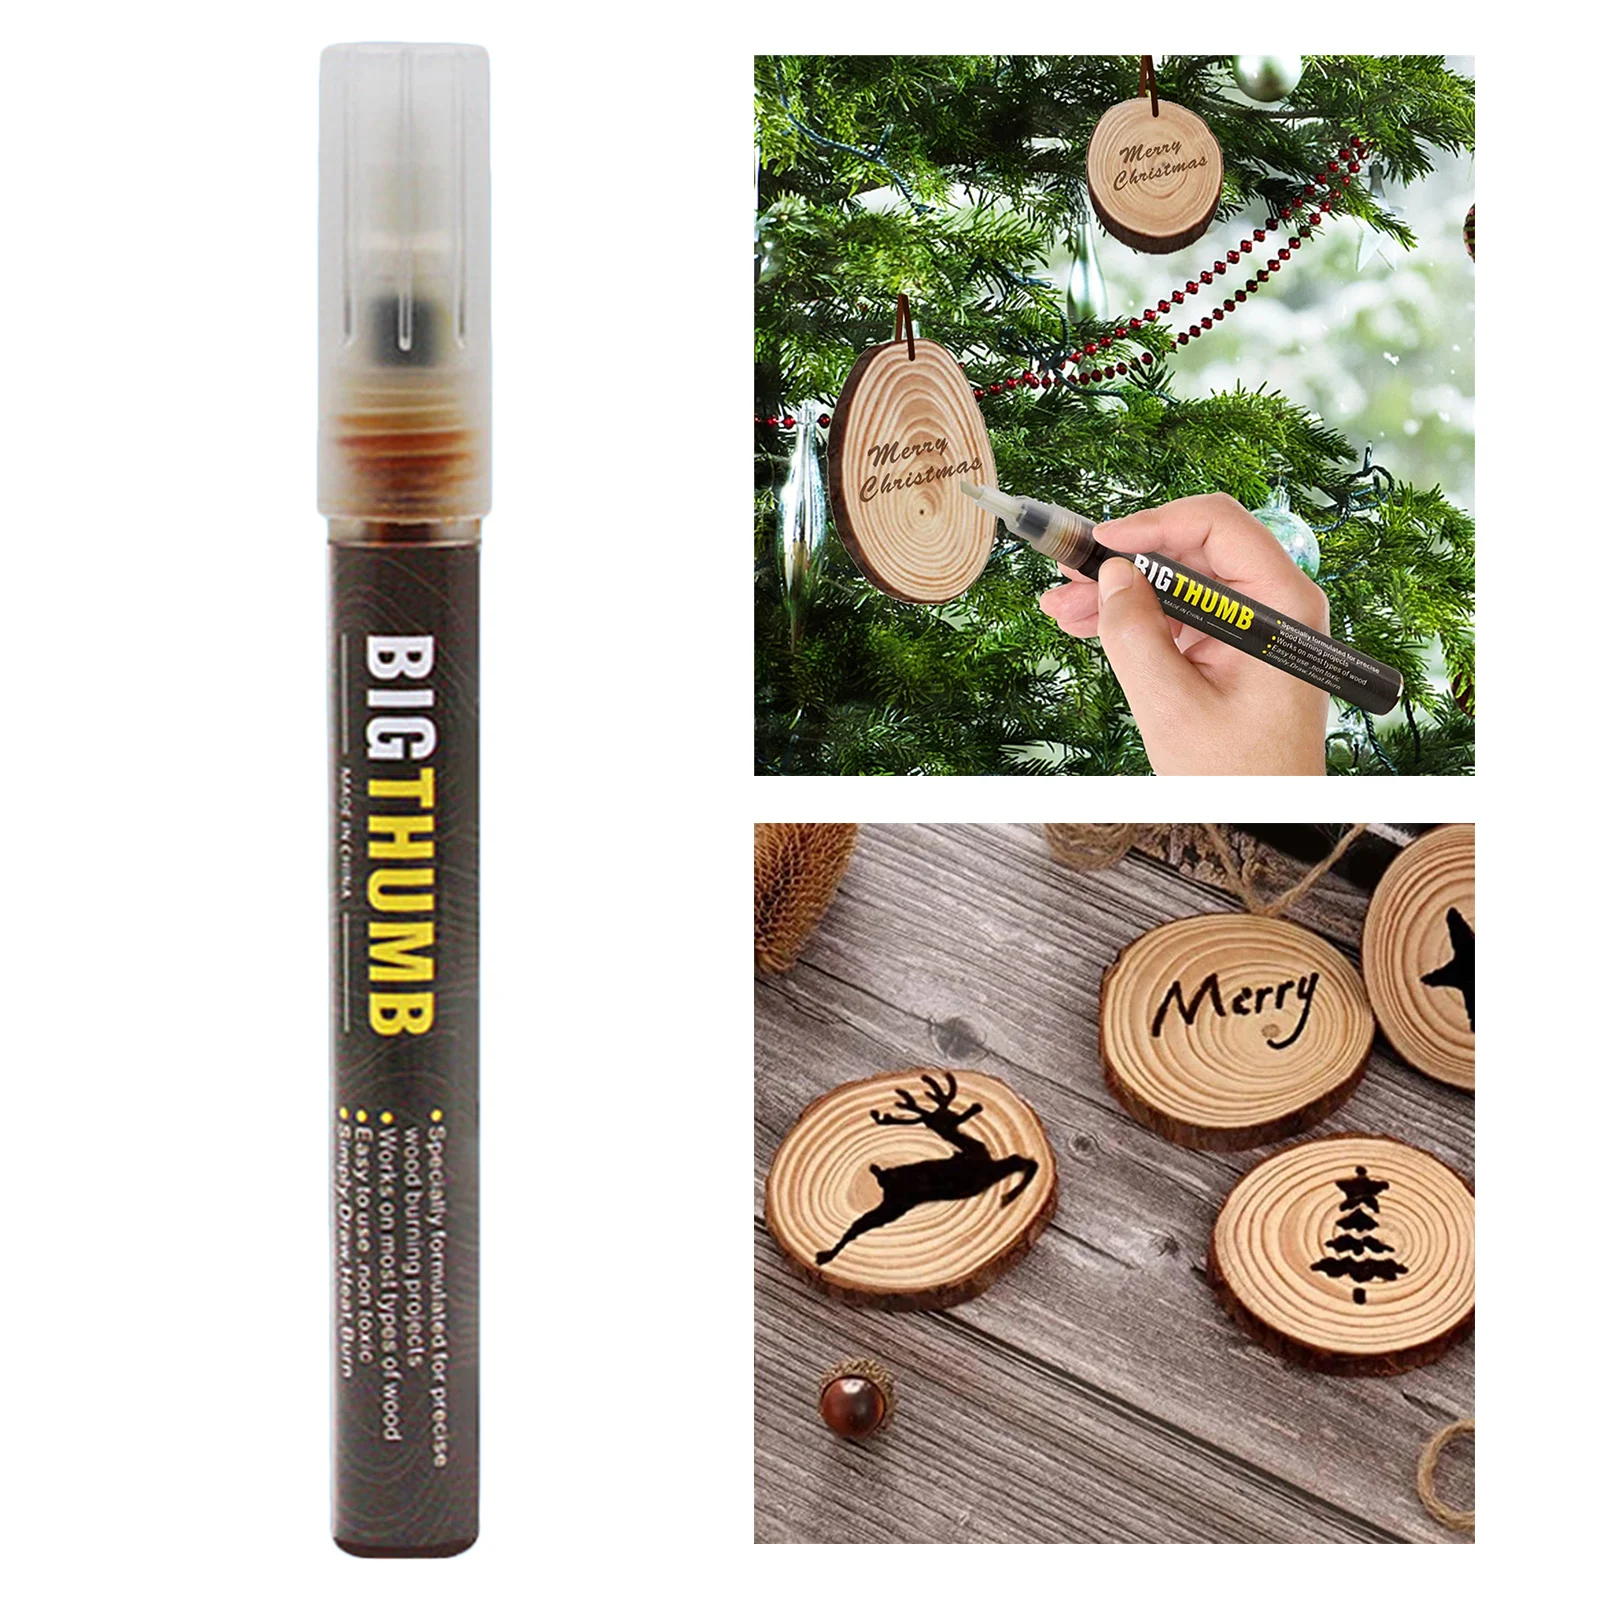 Wood Burning Pen Scorch Burned Marker Pyrography Pens for DIY Projects Wood Painting Tool Easy Use and Safe